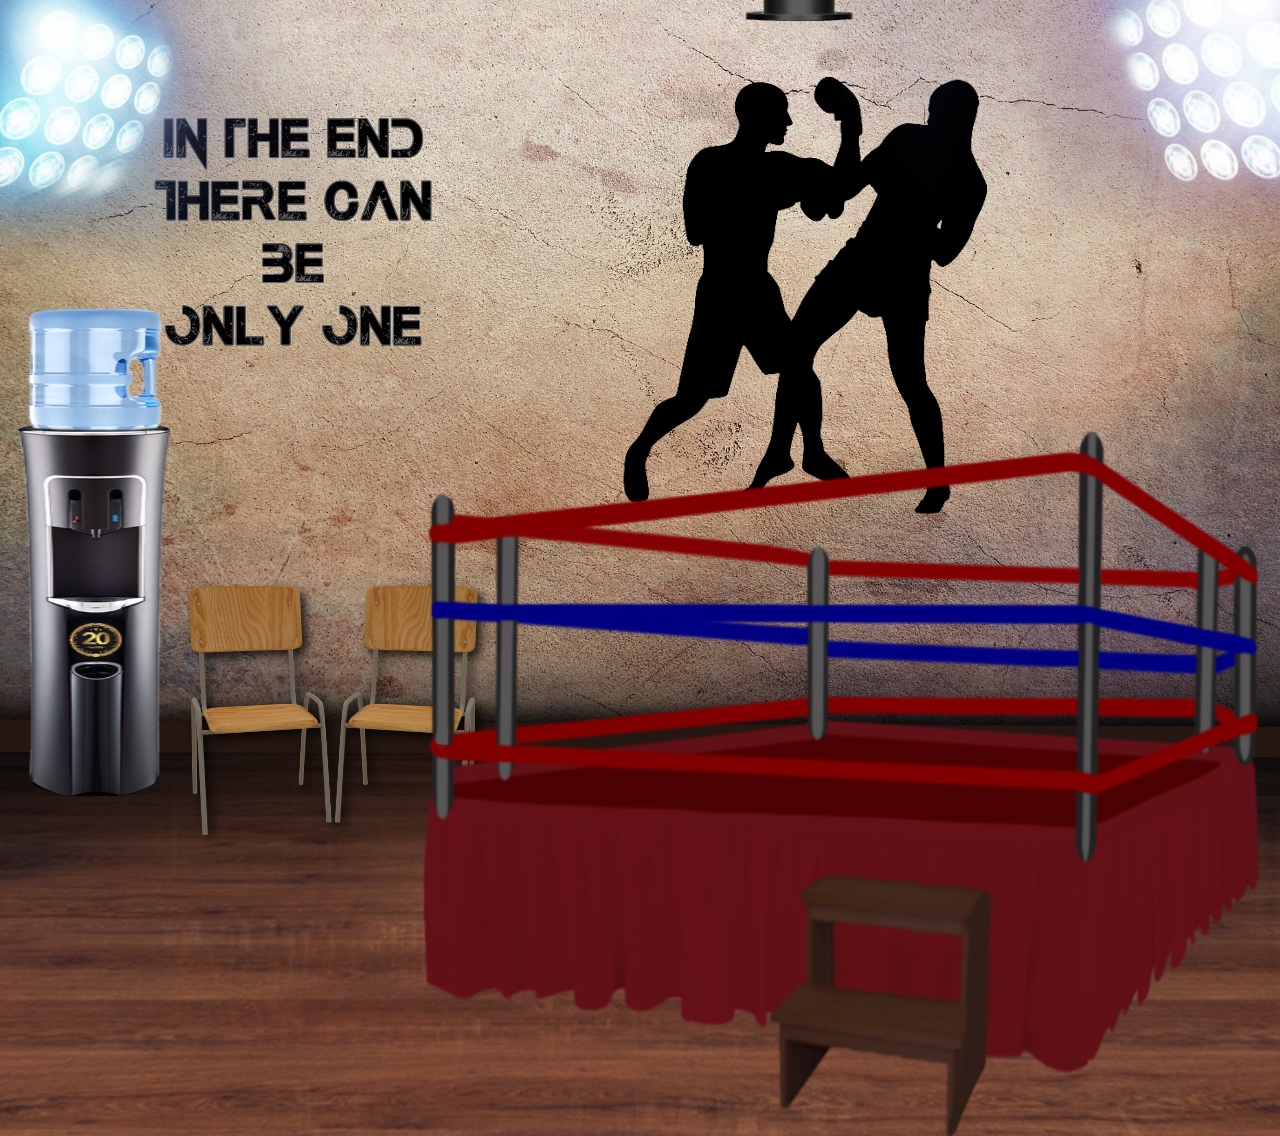 INT. BOXING RING W/LIGHTS – DAY